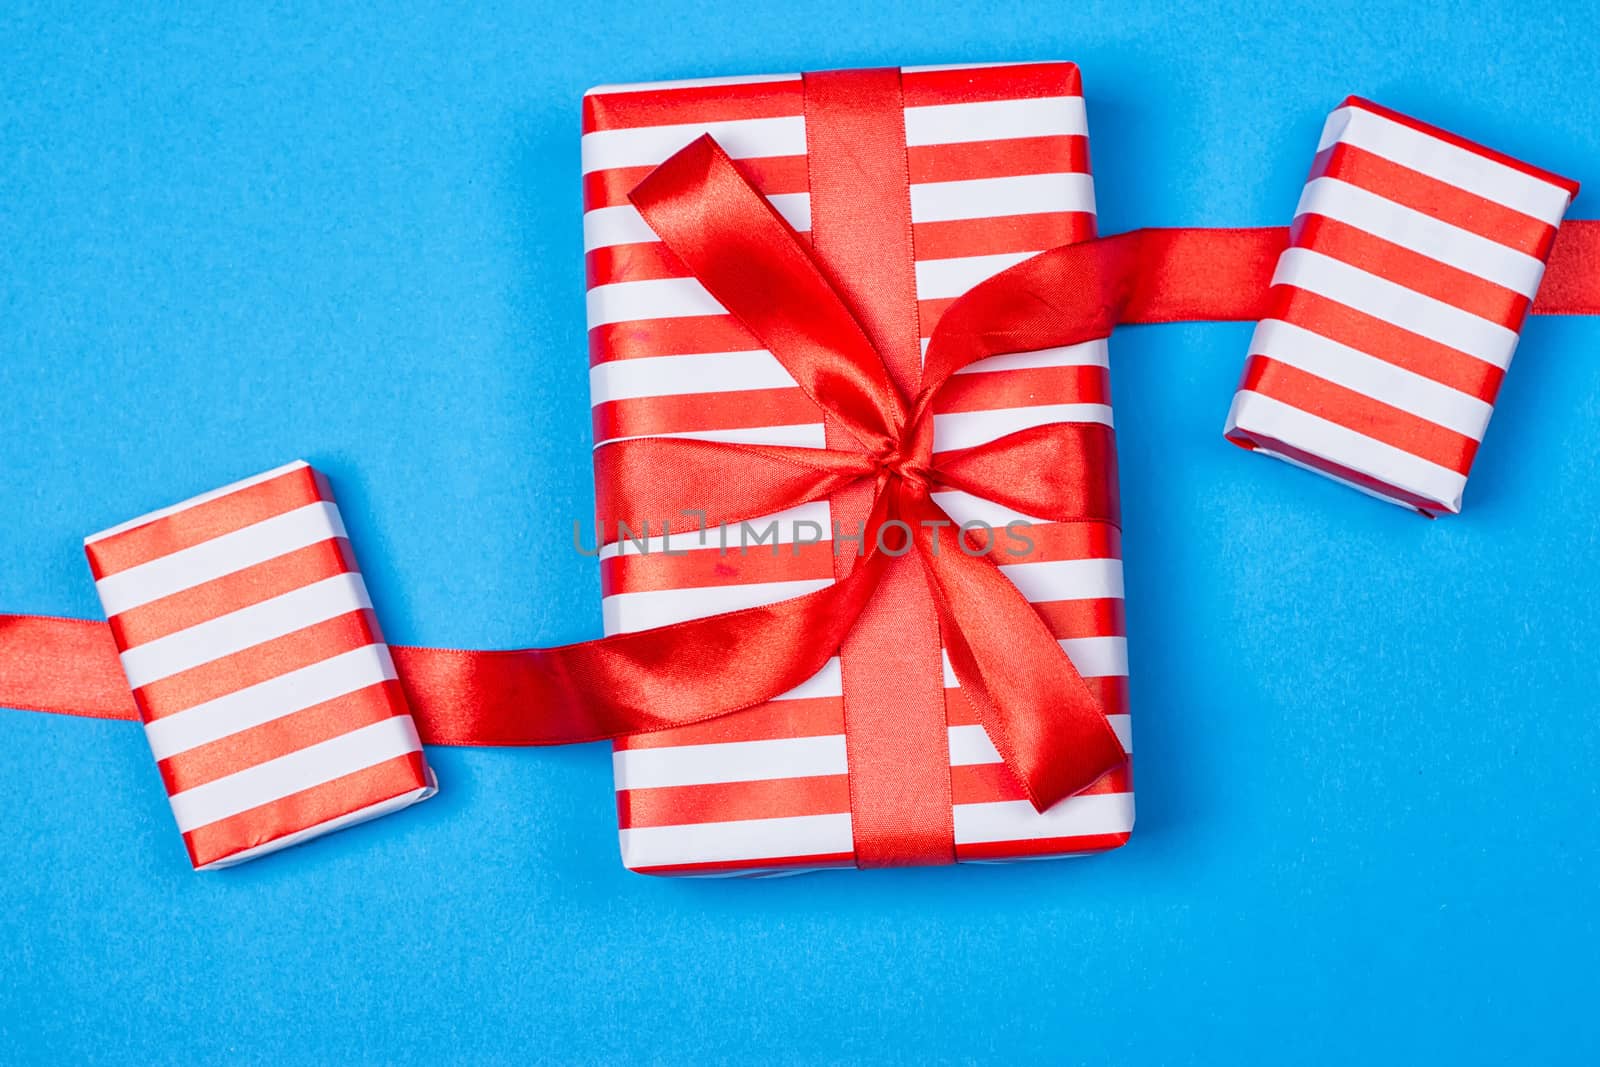 Several neatly laid out gifts in red packing on a blue background. Christmas presents